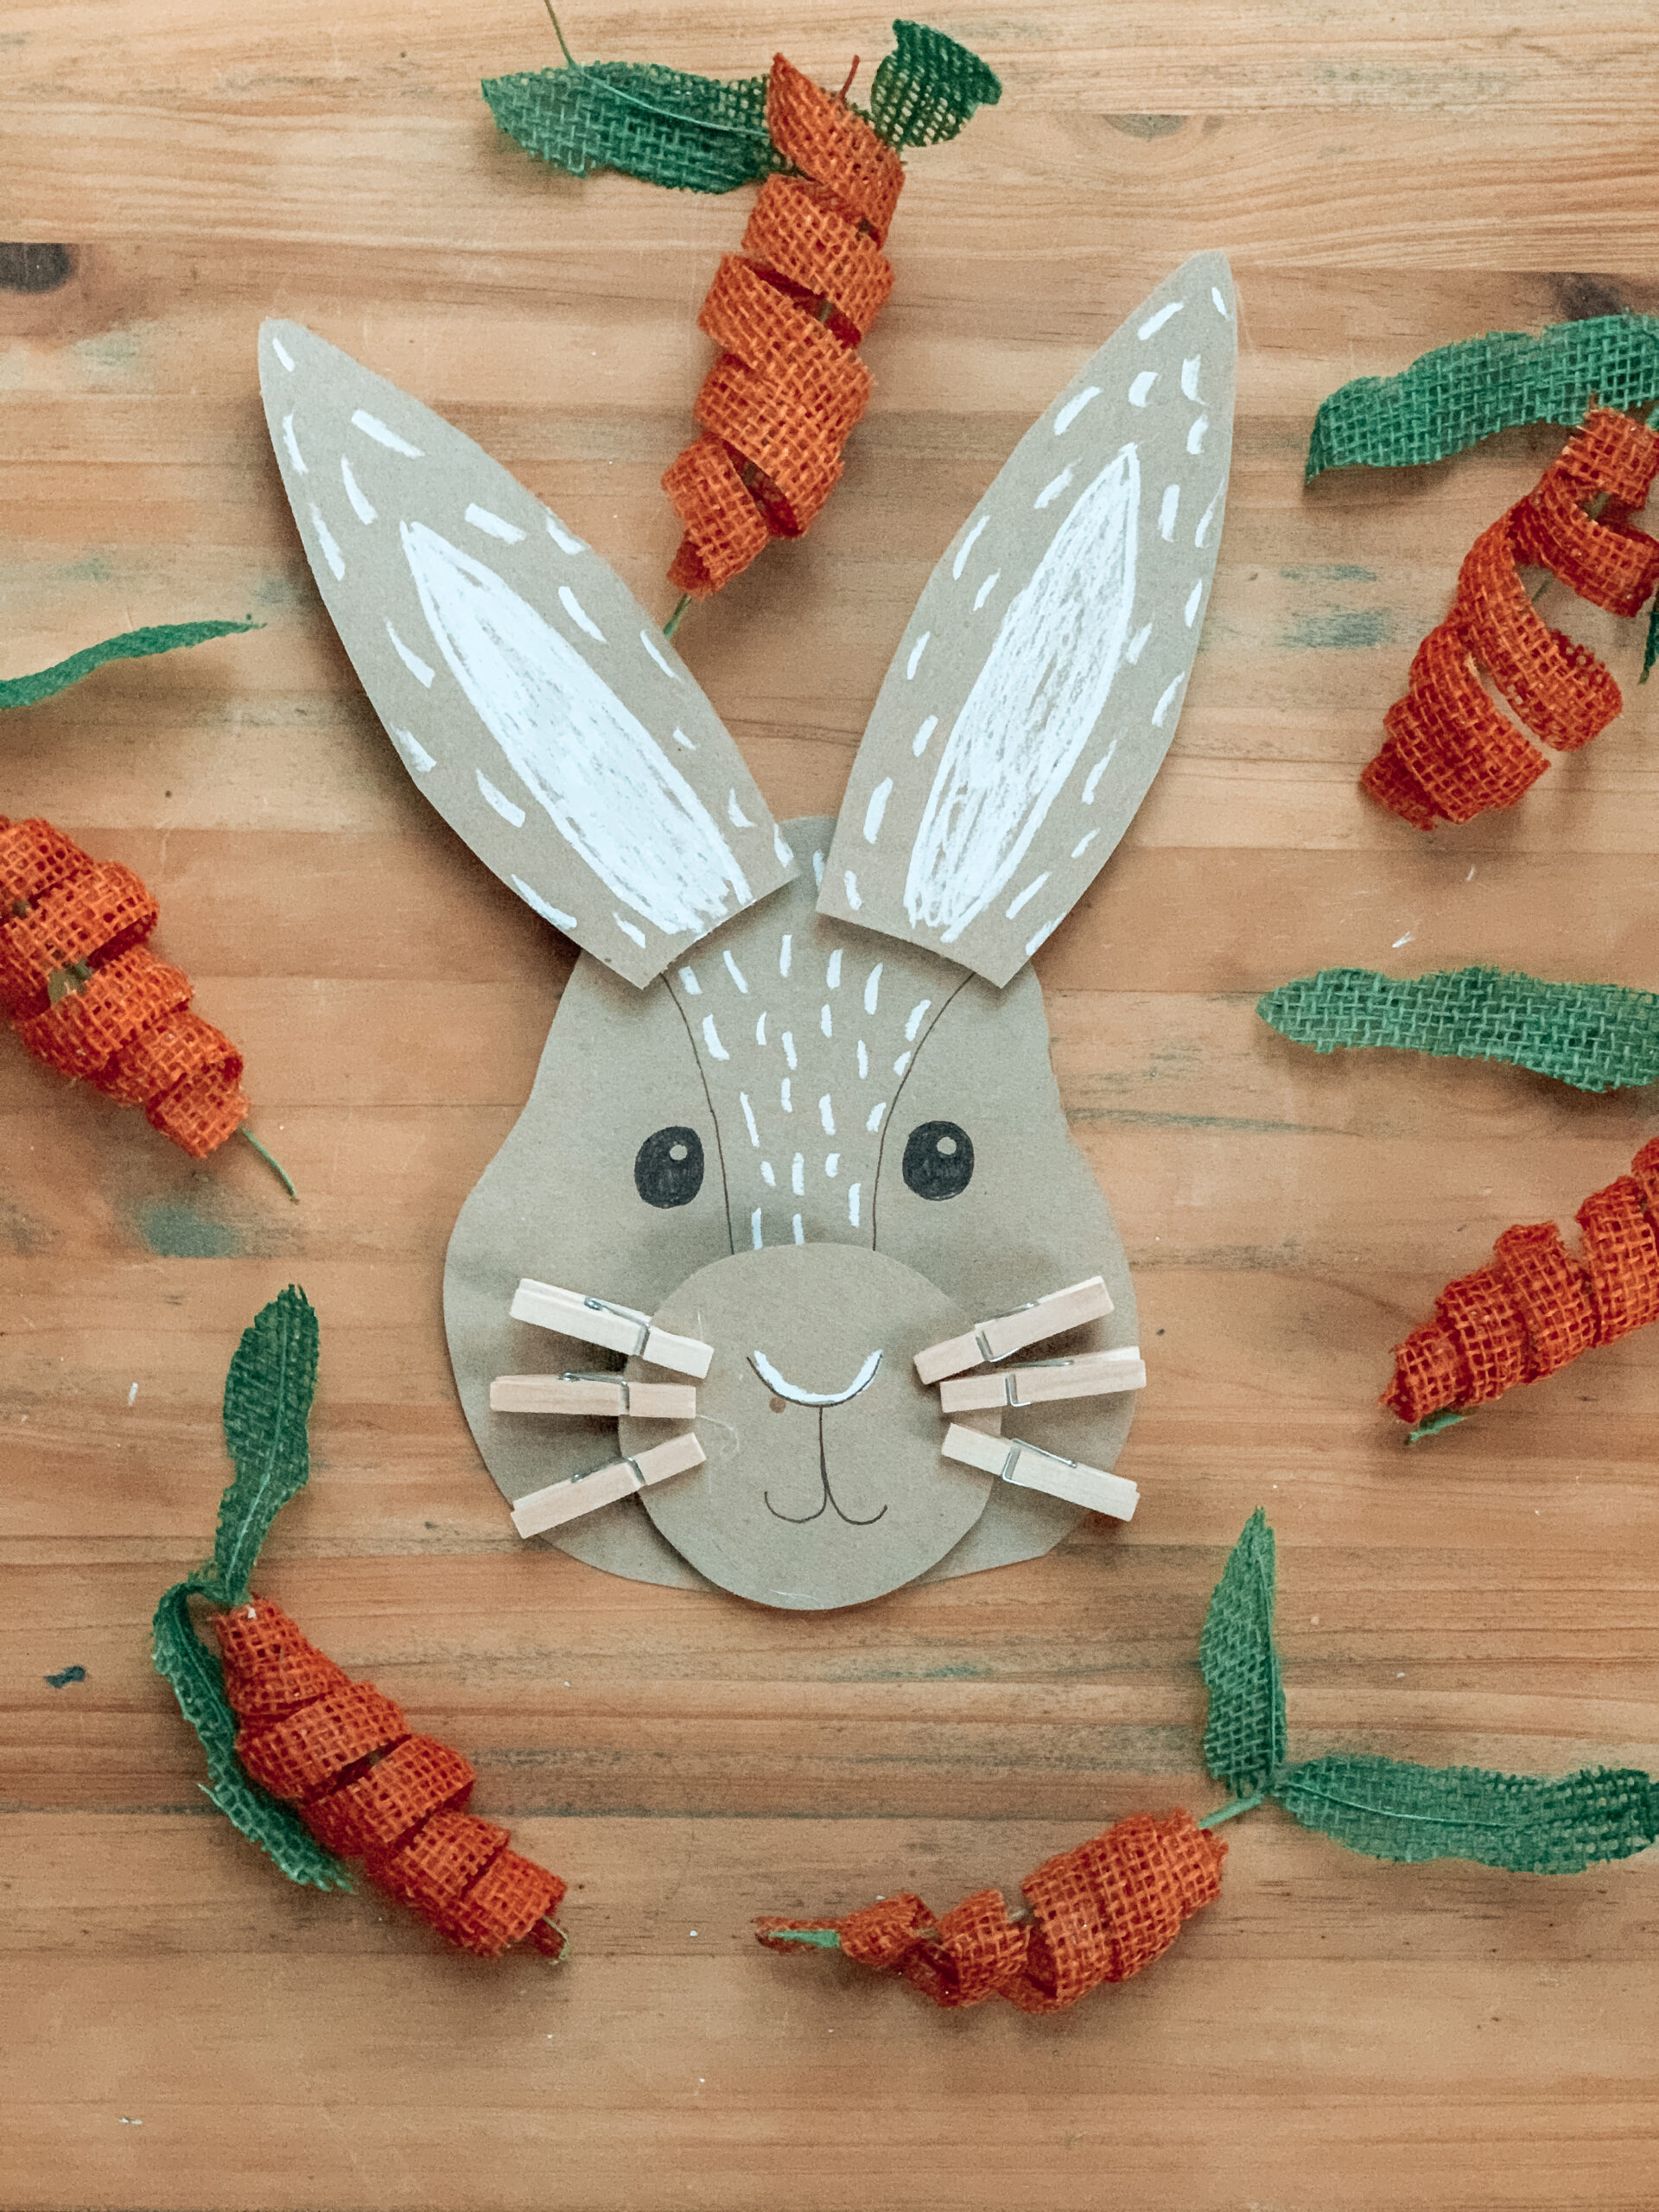 Easter bunny kids activity craft made from repurposed cardboard and clothespins